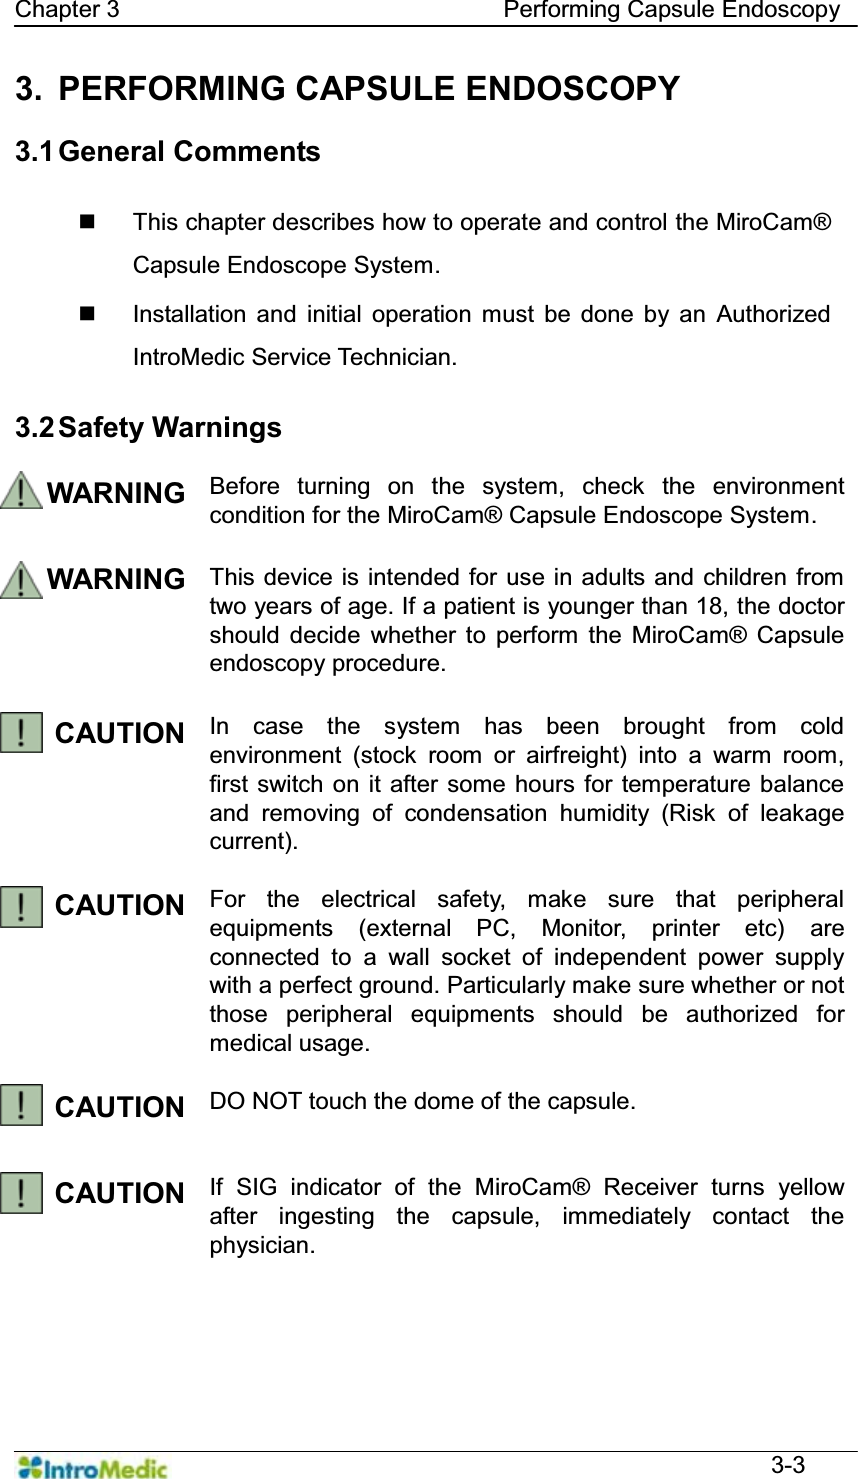   Chapter 3                                Performing Capsule Endoscopy  3-3 3. PERFORMING CAPSULE ENDOSCOPY  3.1 General  Comments      This chapter describes how to operate and control the MiroCam® Capsule Endoscope System.  Installation and initial operation must be done by an Authorized IntroMedic Service Technician.    3.2 Safety  Warnings  WARNING Before turning on the system, check the environment condition for the MiroCam® Capsule Endoscope System.  WARNING This device is intended for use in adults and children from two years of age. If a patient is younger than 18, the doctor should decide whether to perform the MiroCam® Capsule endoscopy procedure.  CAUTION  In case the system has been brought from cold environment (stock room or airfreight) into a warm room, first switch on it after some hours for temperature balance and removing of condensation humidity (Risk of leakage current).  CAUTION  For the electrical safety, make sure that peripheral equipments (external PC, Monitor, printer etc) are connected to a wall socket of independent power supply with a perfect ground. Particularly make sure whether or not those peripheral equipments should be authorized for medical usage.  CAUTION  DO NOT touch the dome of the capsule.   CAUTION  If SIG indicator of the MiroCam® Receiver turns yellow after ingesting the capsule, immediately contact the physician.   